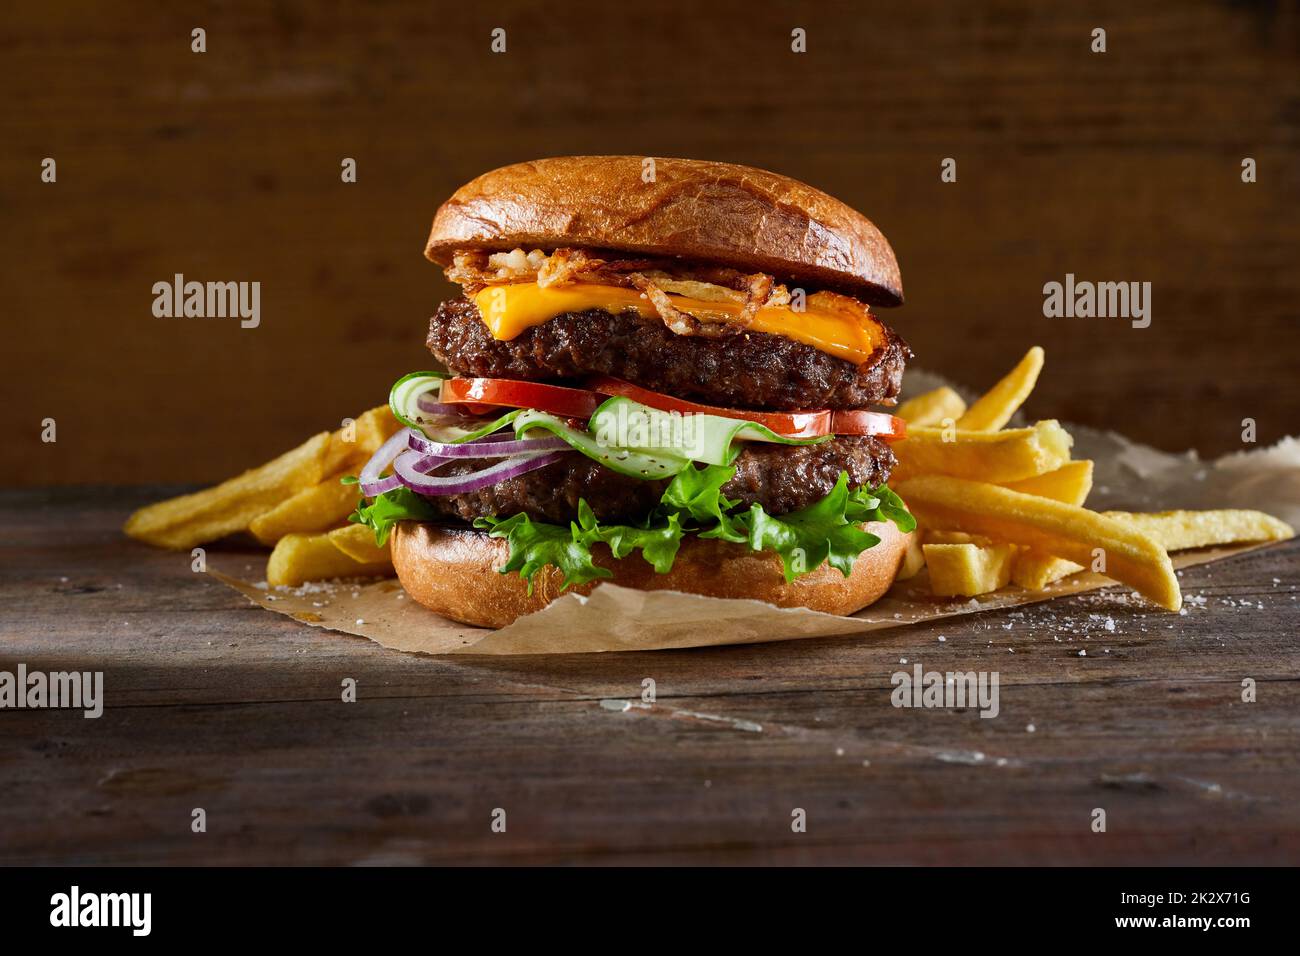 Appetizing burger with cutlets and fries Stock Photo